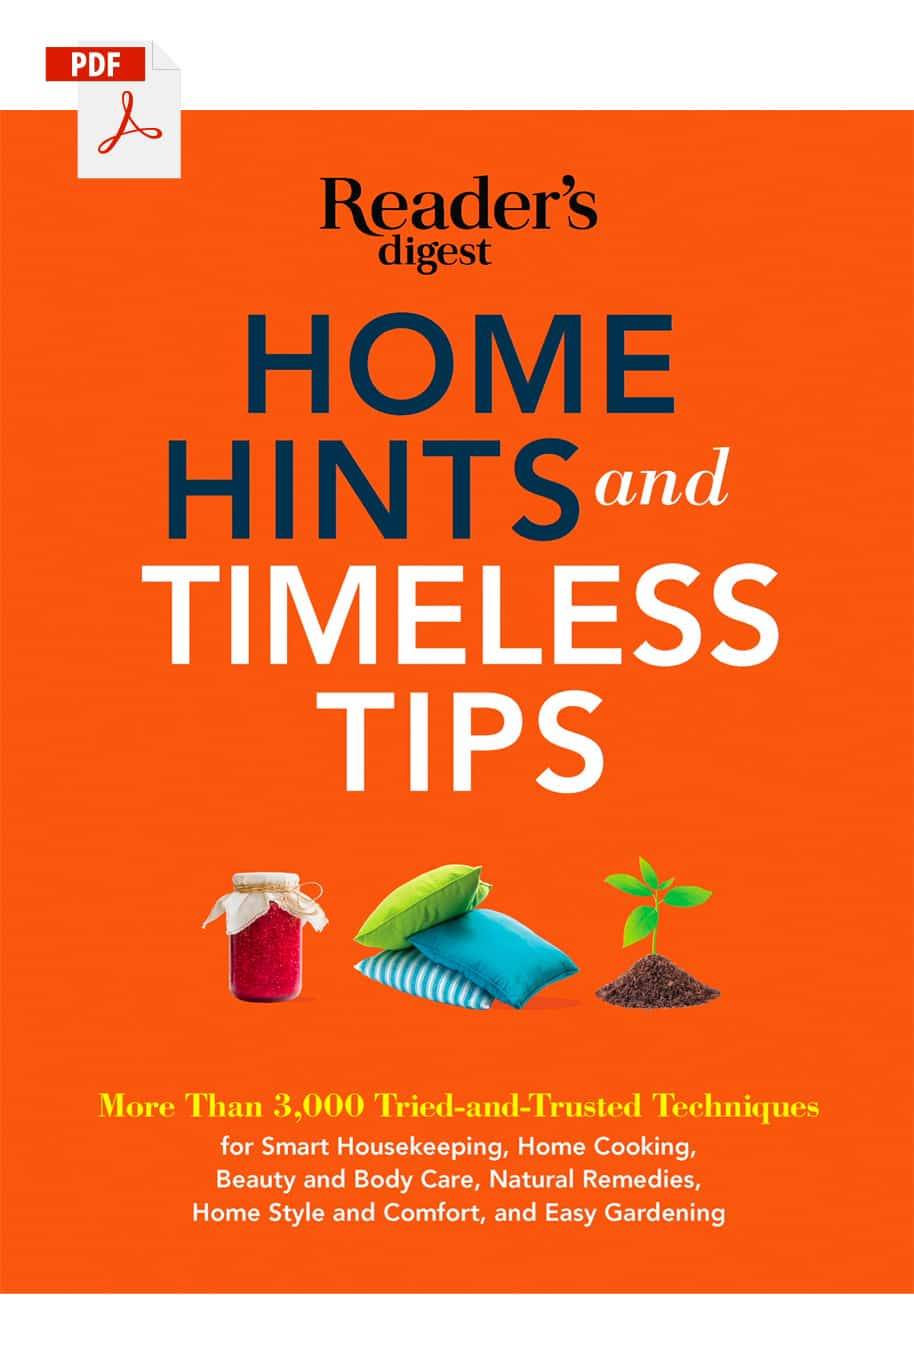 Home Hints & Timeless Tips - 948 pages